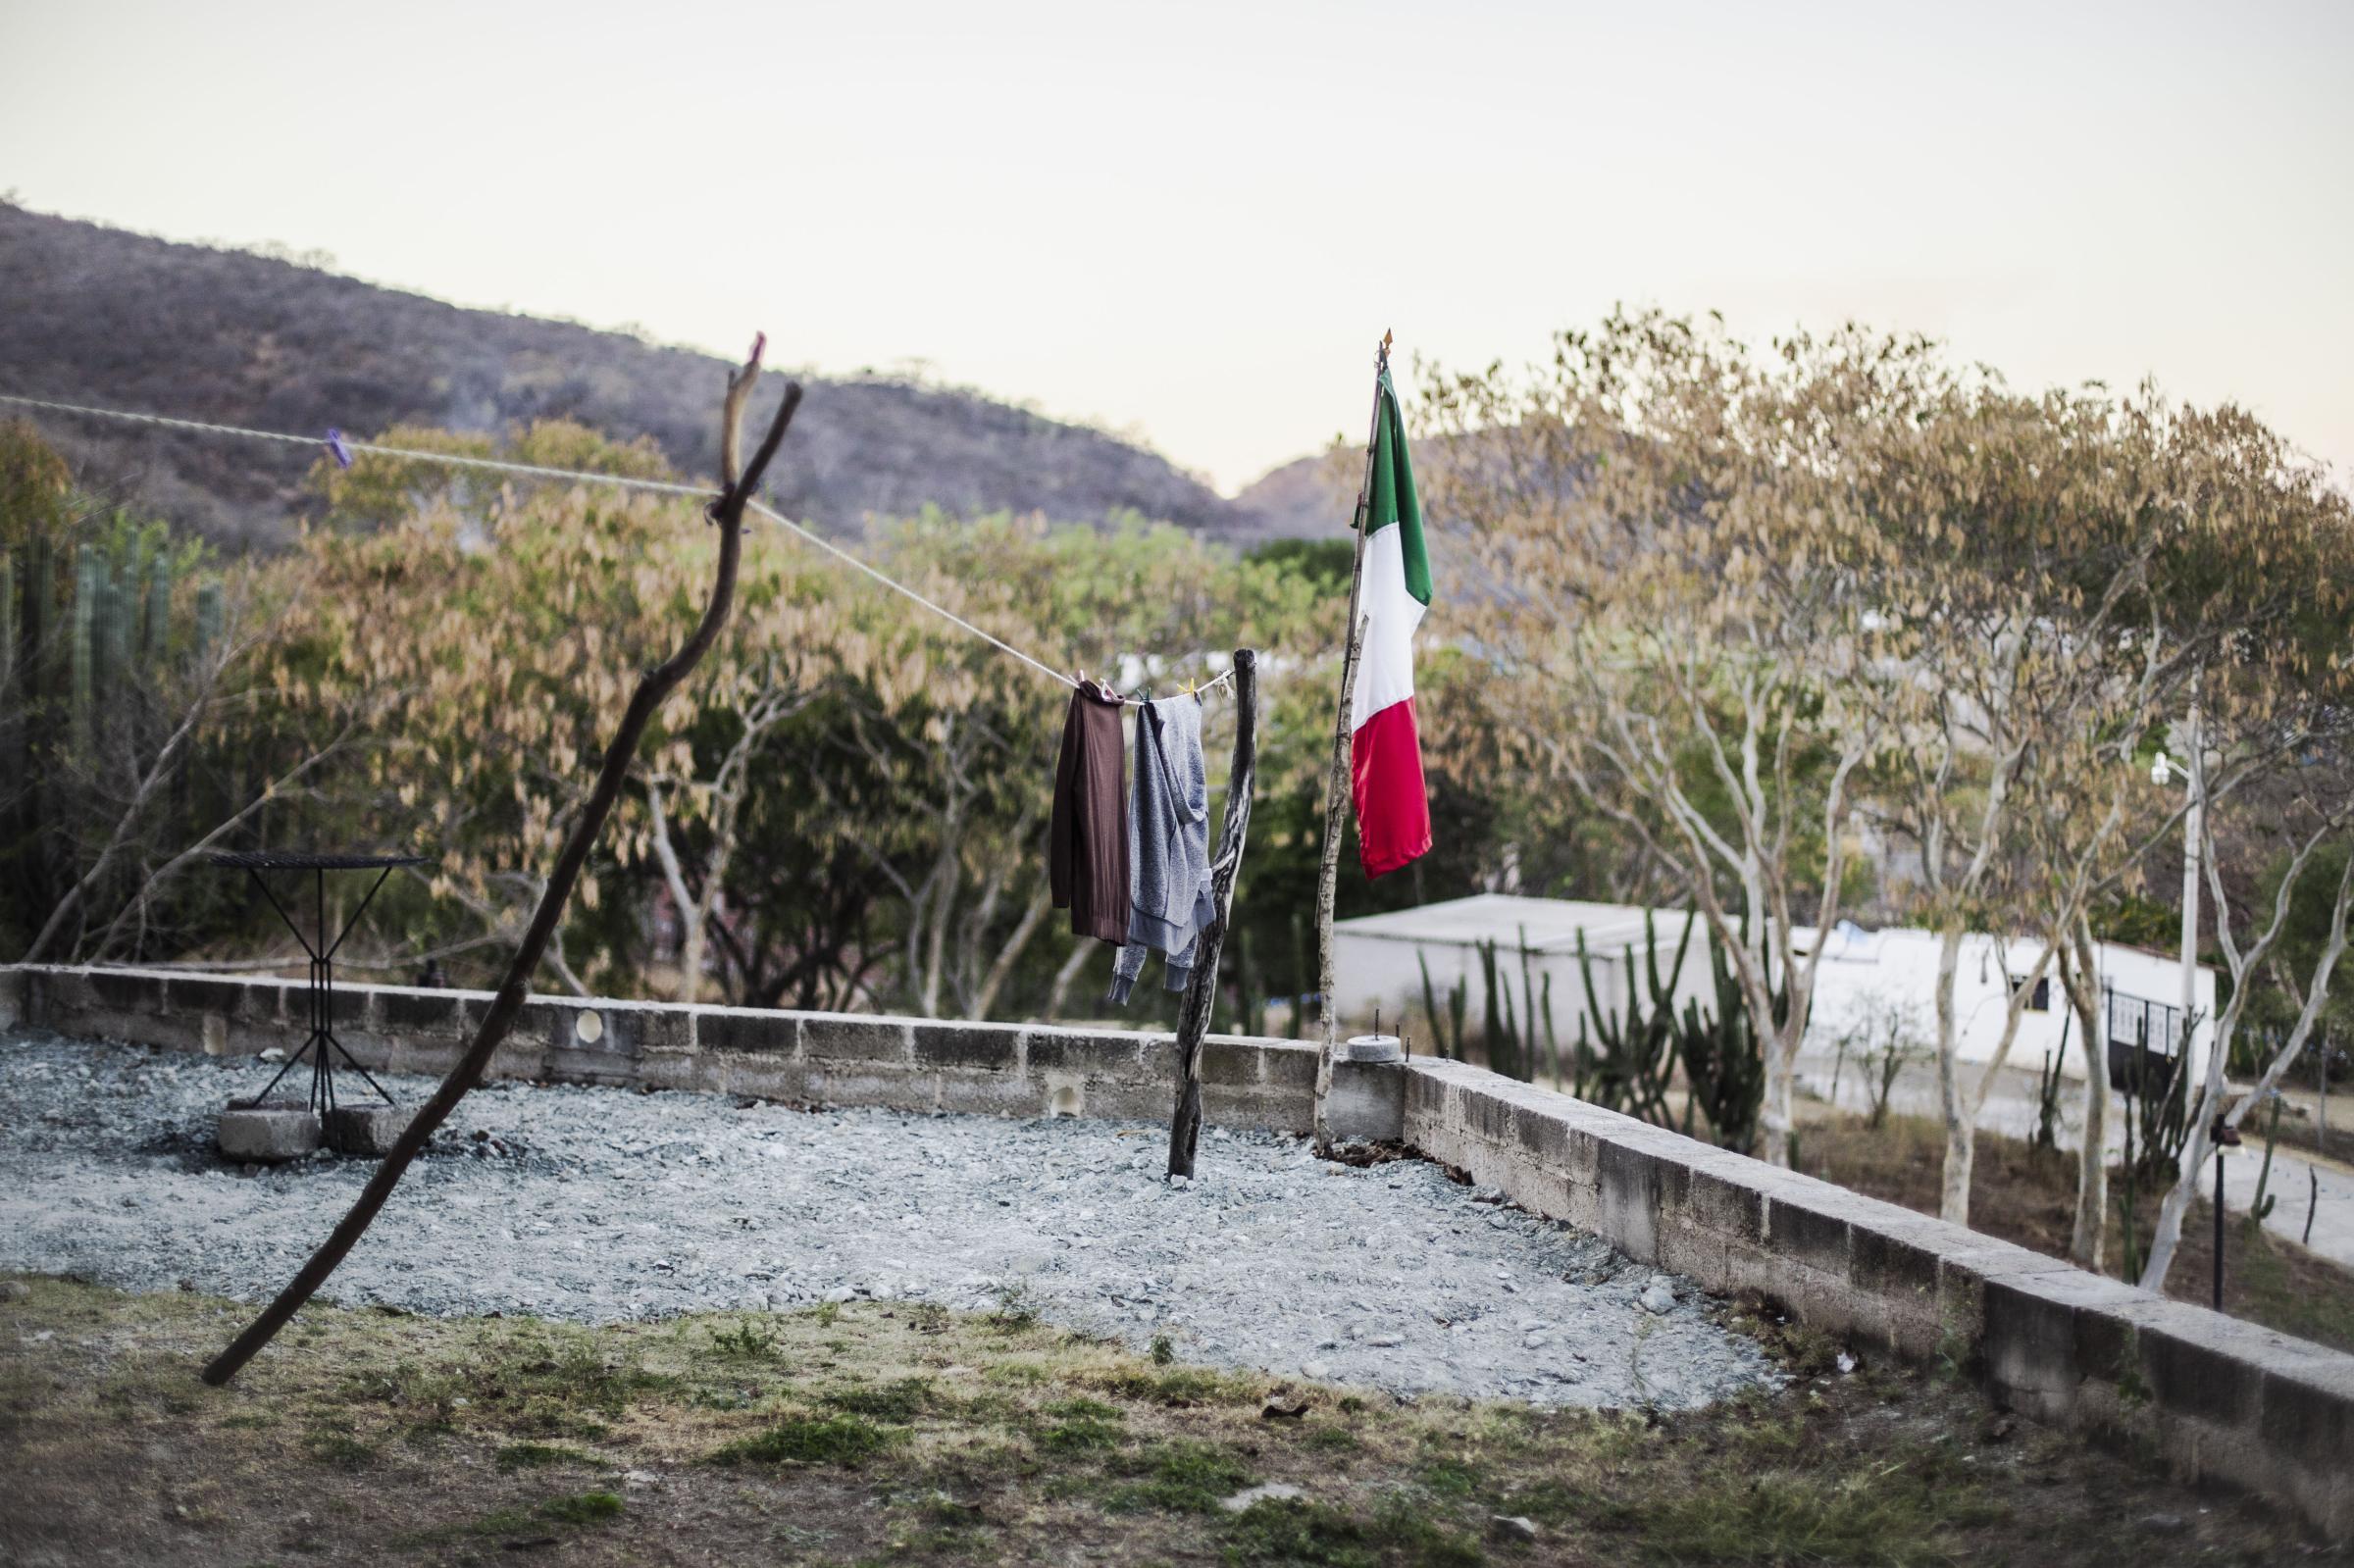 Bloomberg Businessweek - How a U.S. Remittance Windfall Saved Small Towns in Mexico